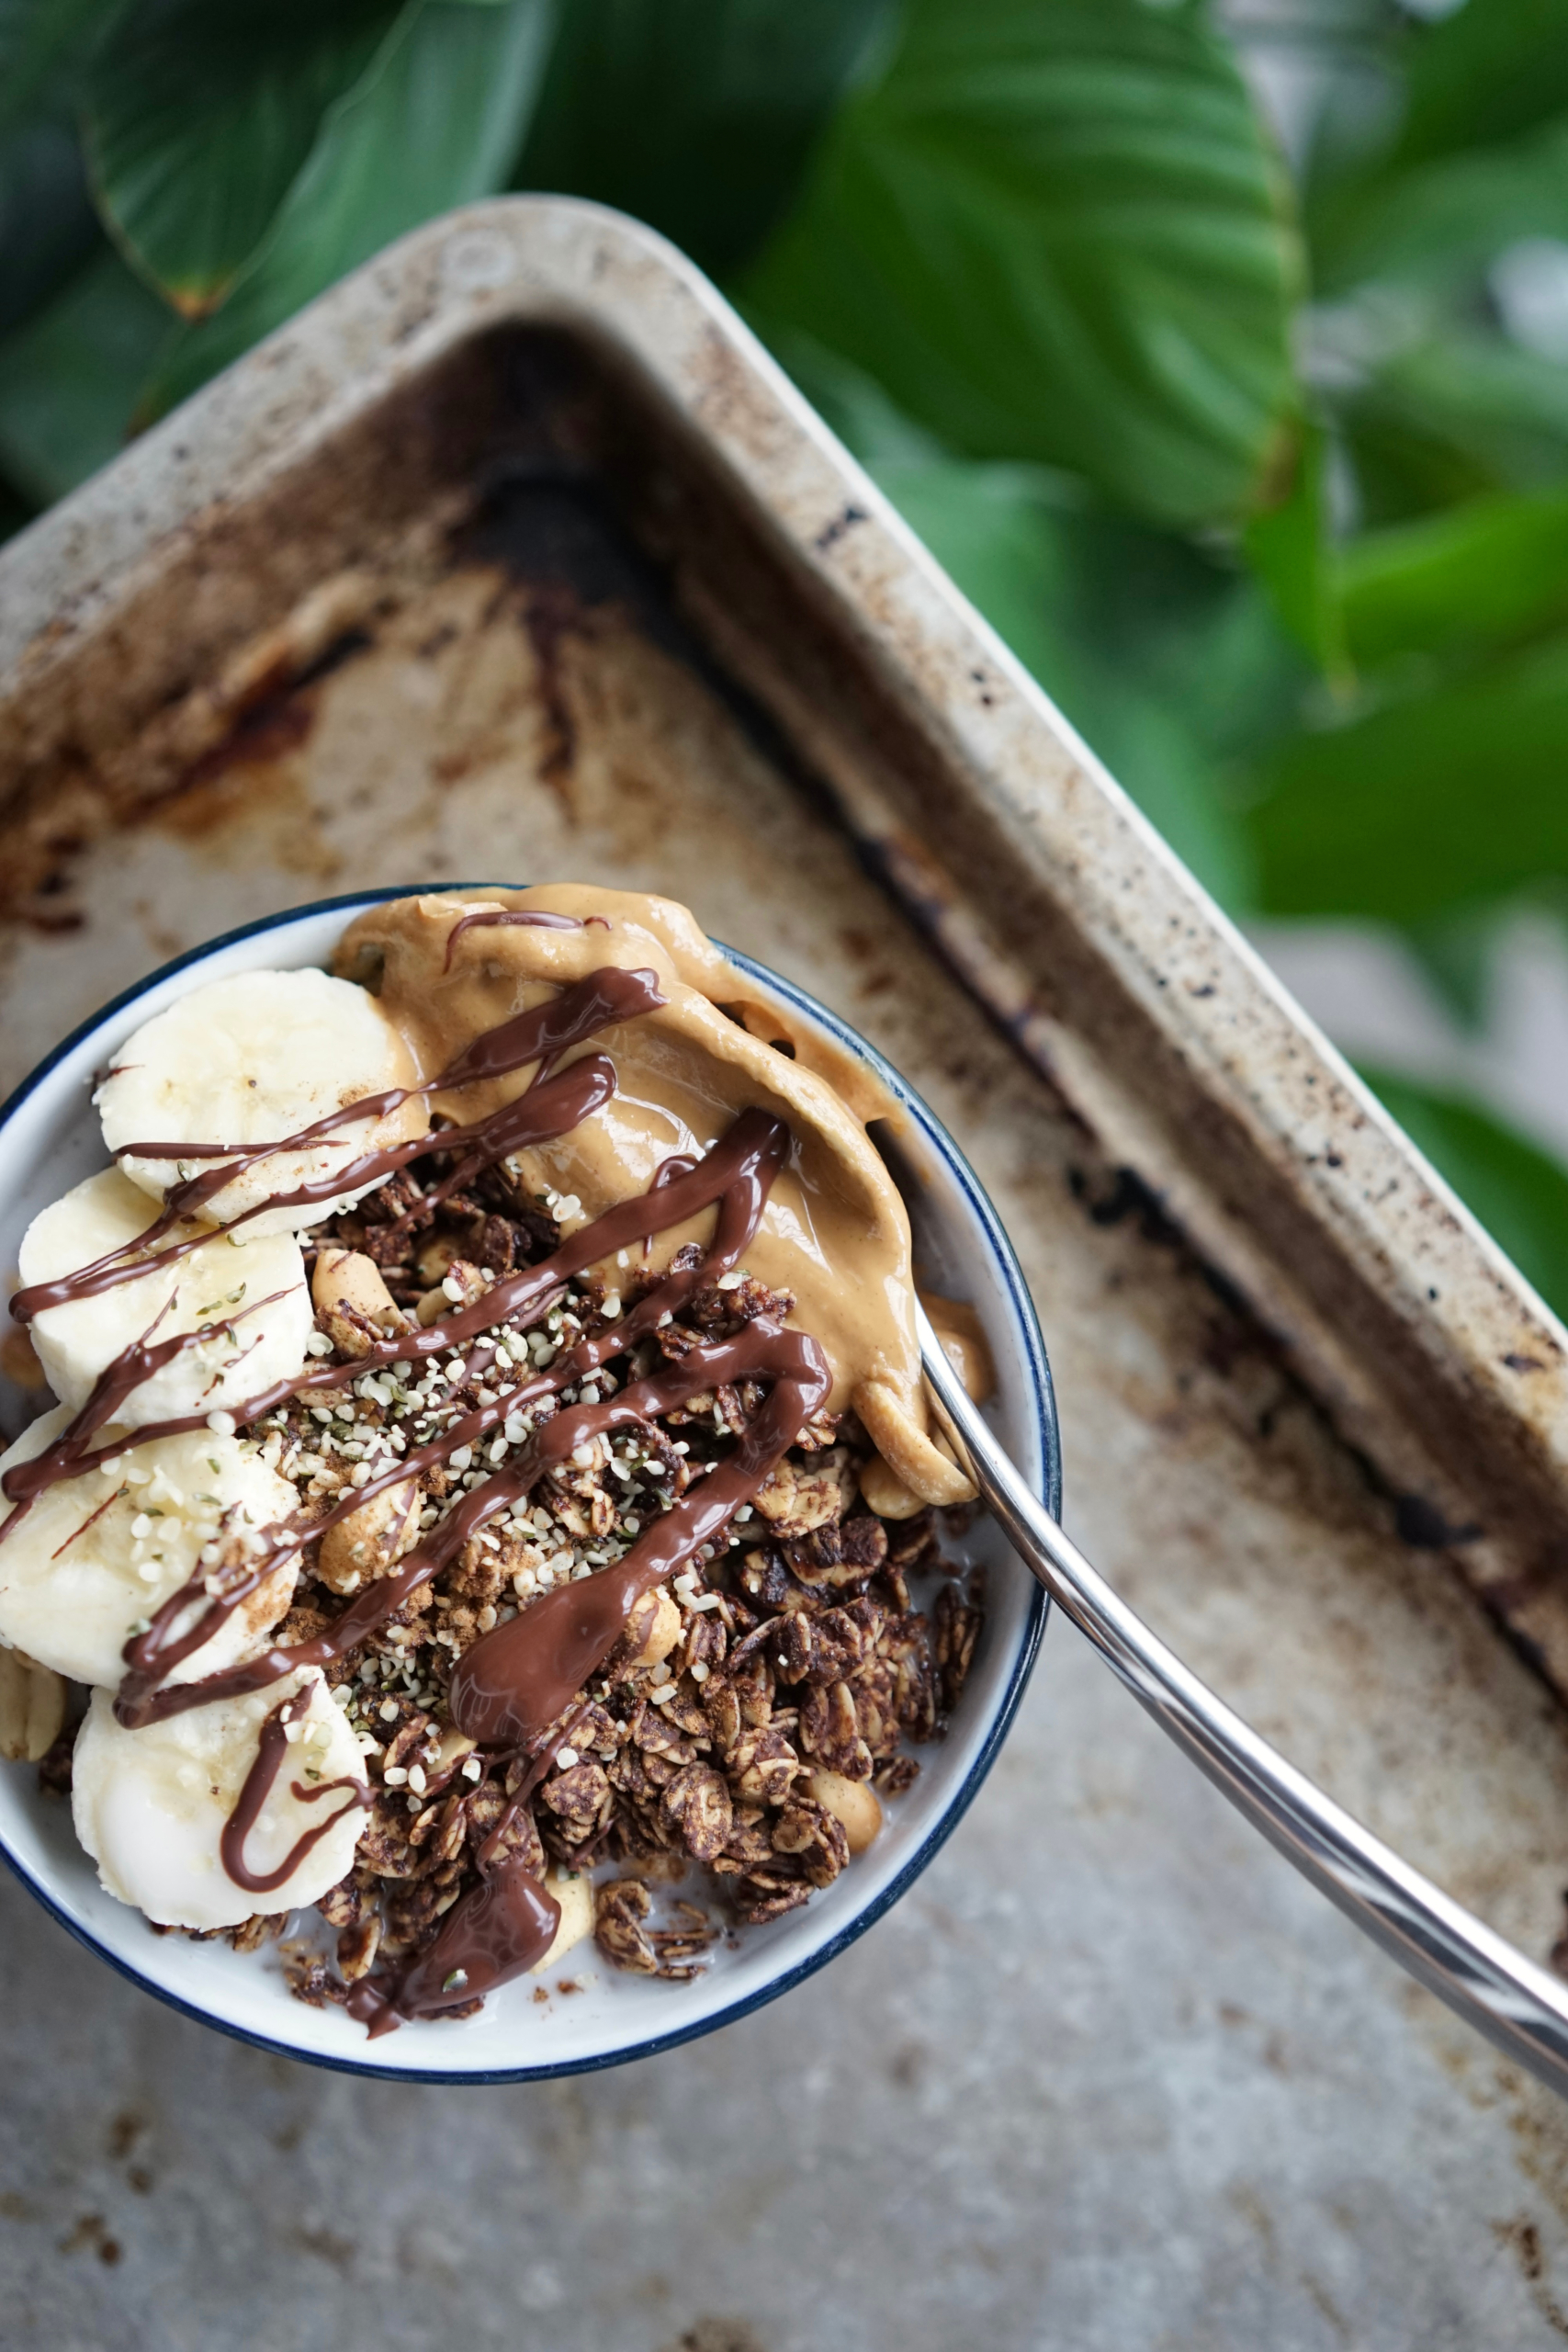 Peanut Butter Chocolate Granola | Living Healthy in Seattle